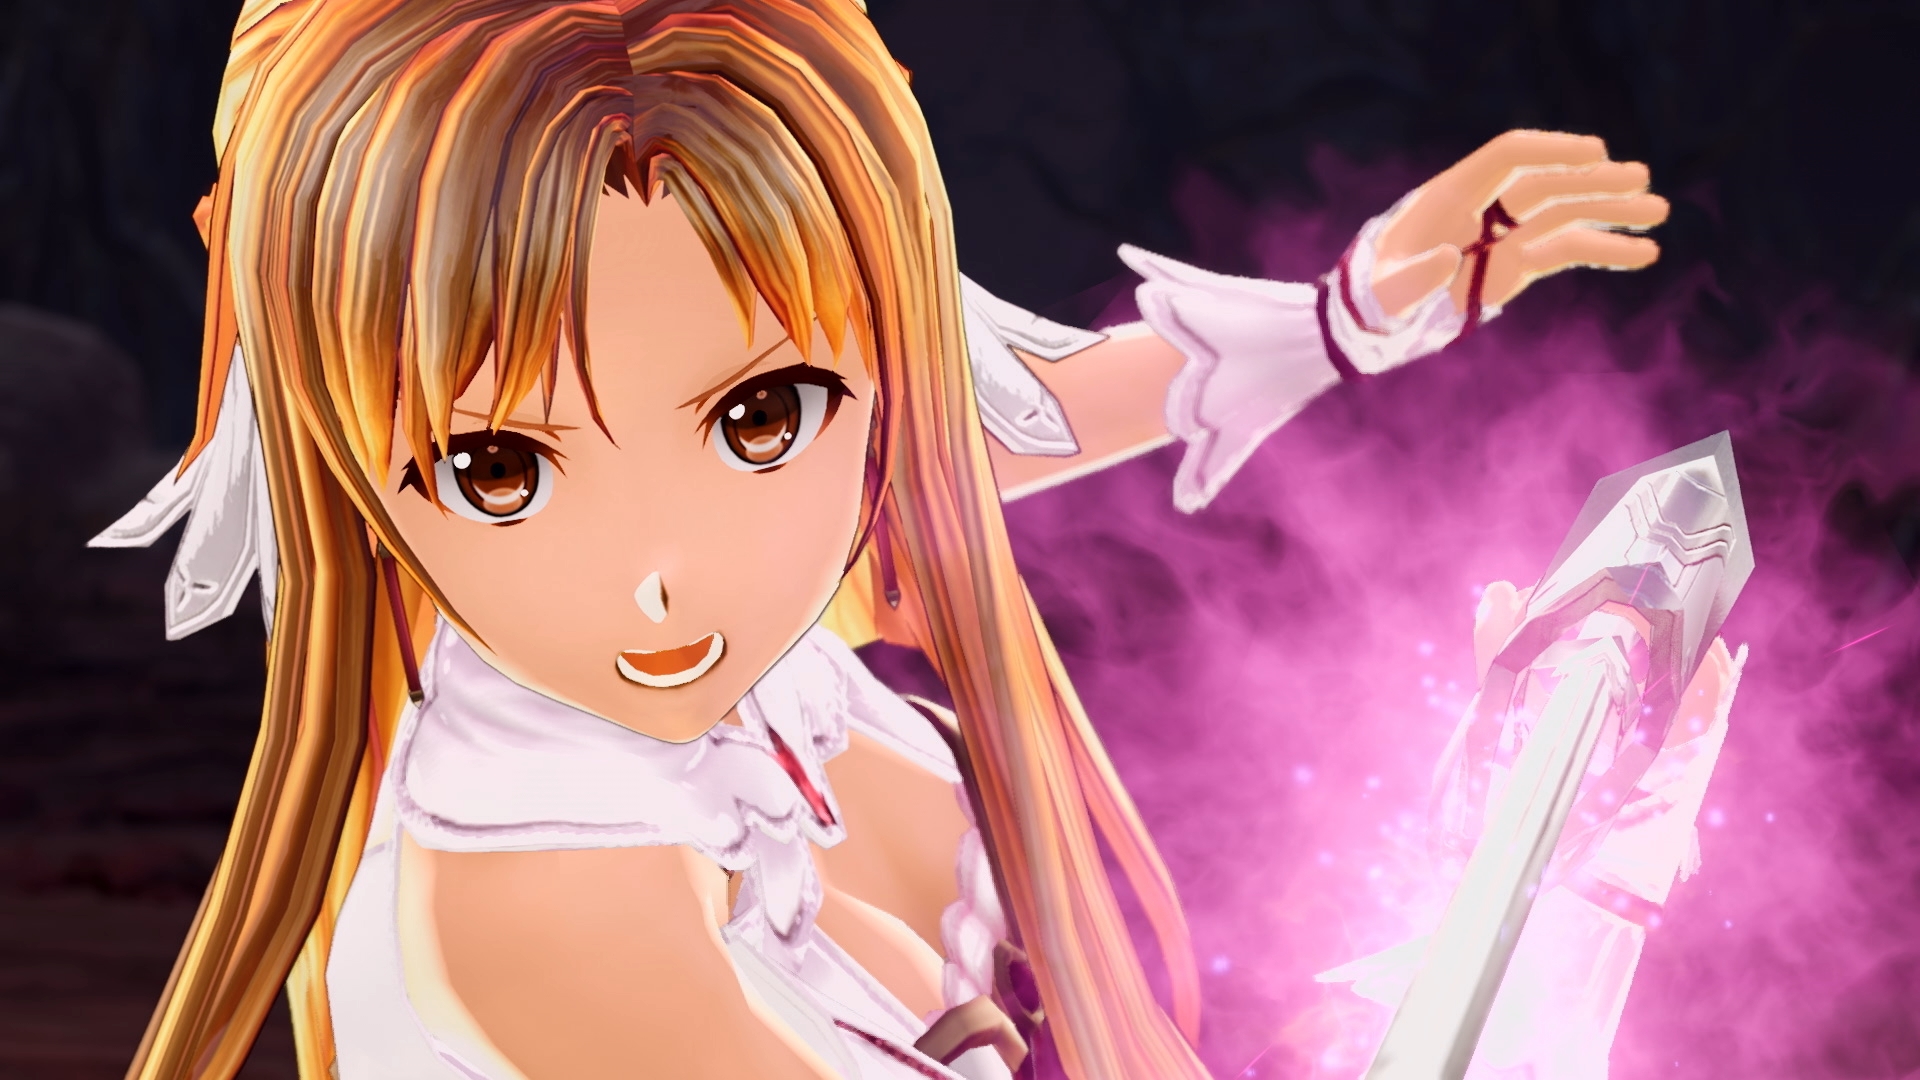 Sword Art Online: Last Recollection - Release date + What we know